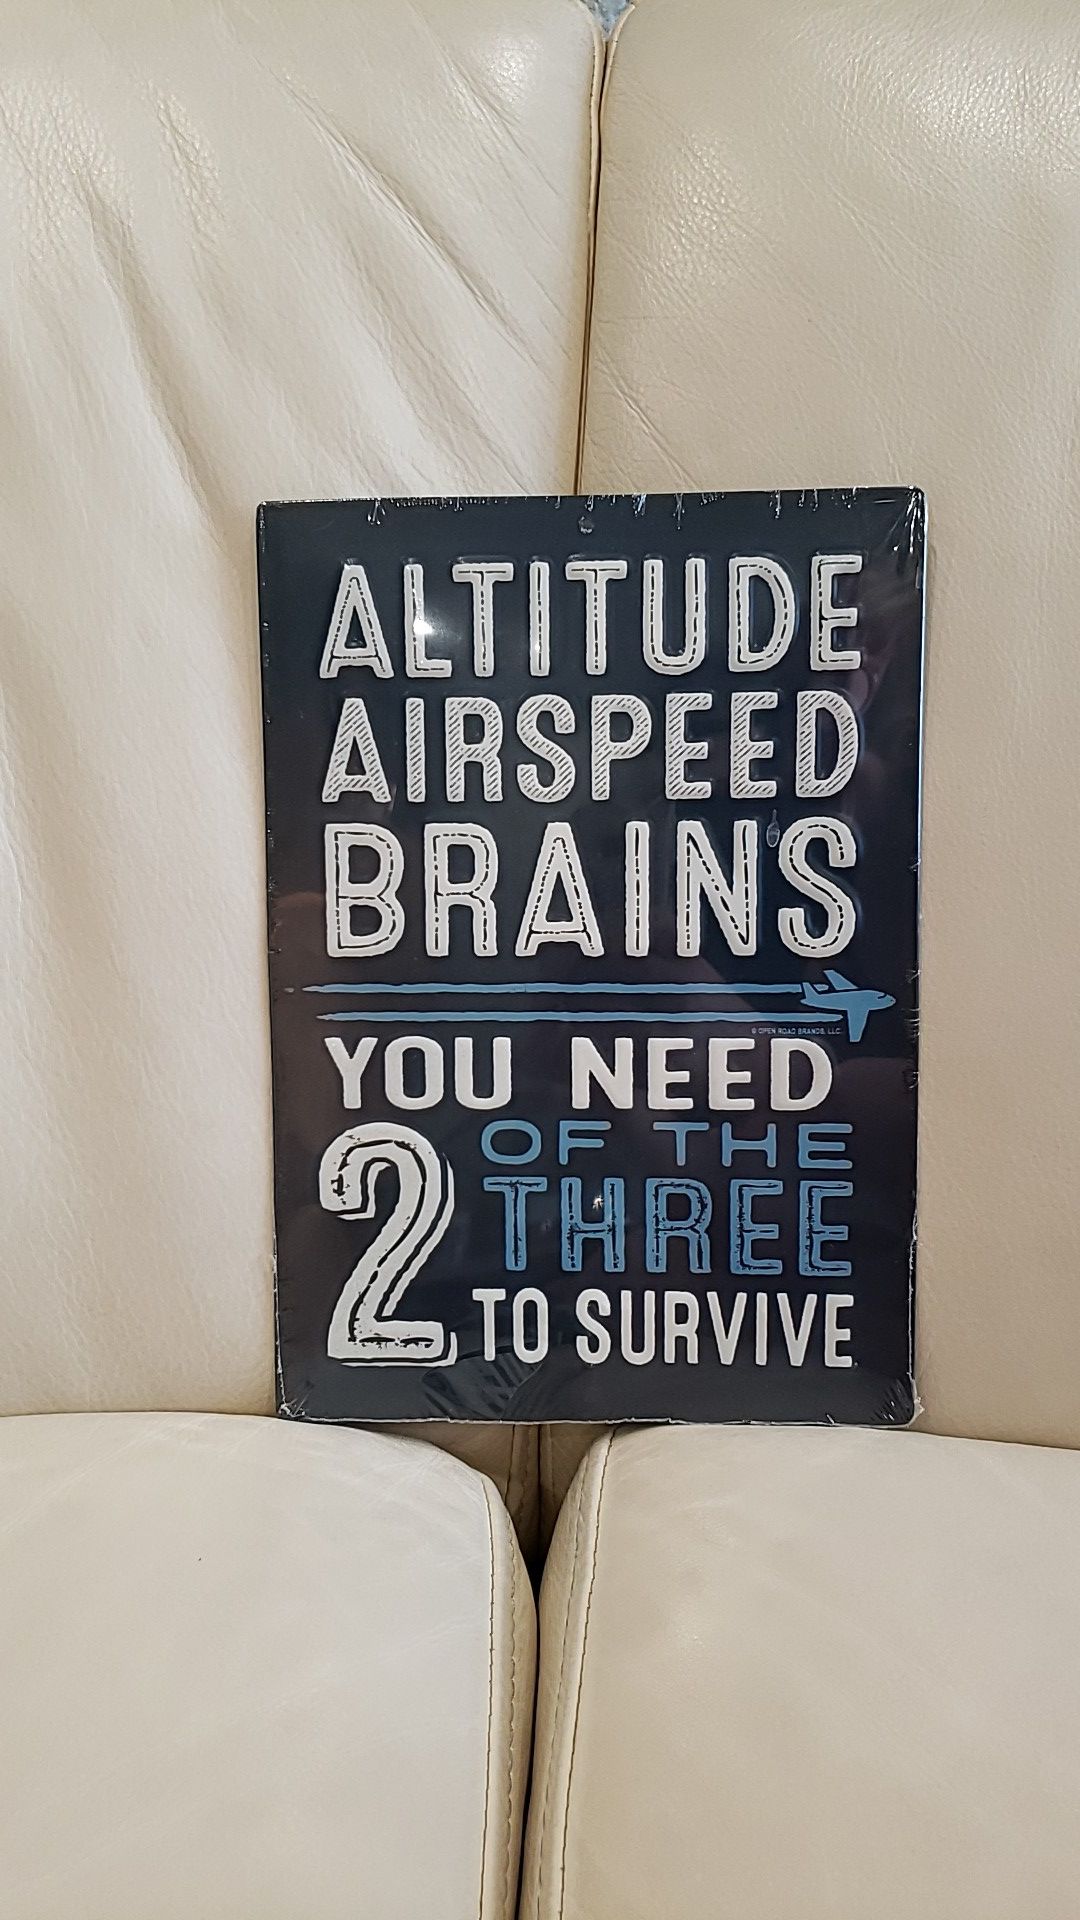 Brand new funny metal embossed wall decoration sign. Great for pilot, airplane aviation jet enthusiast or airforce